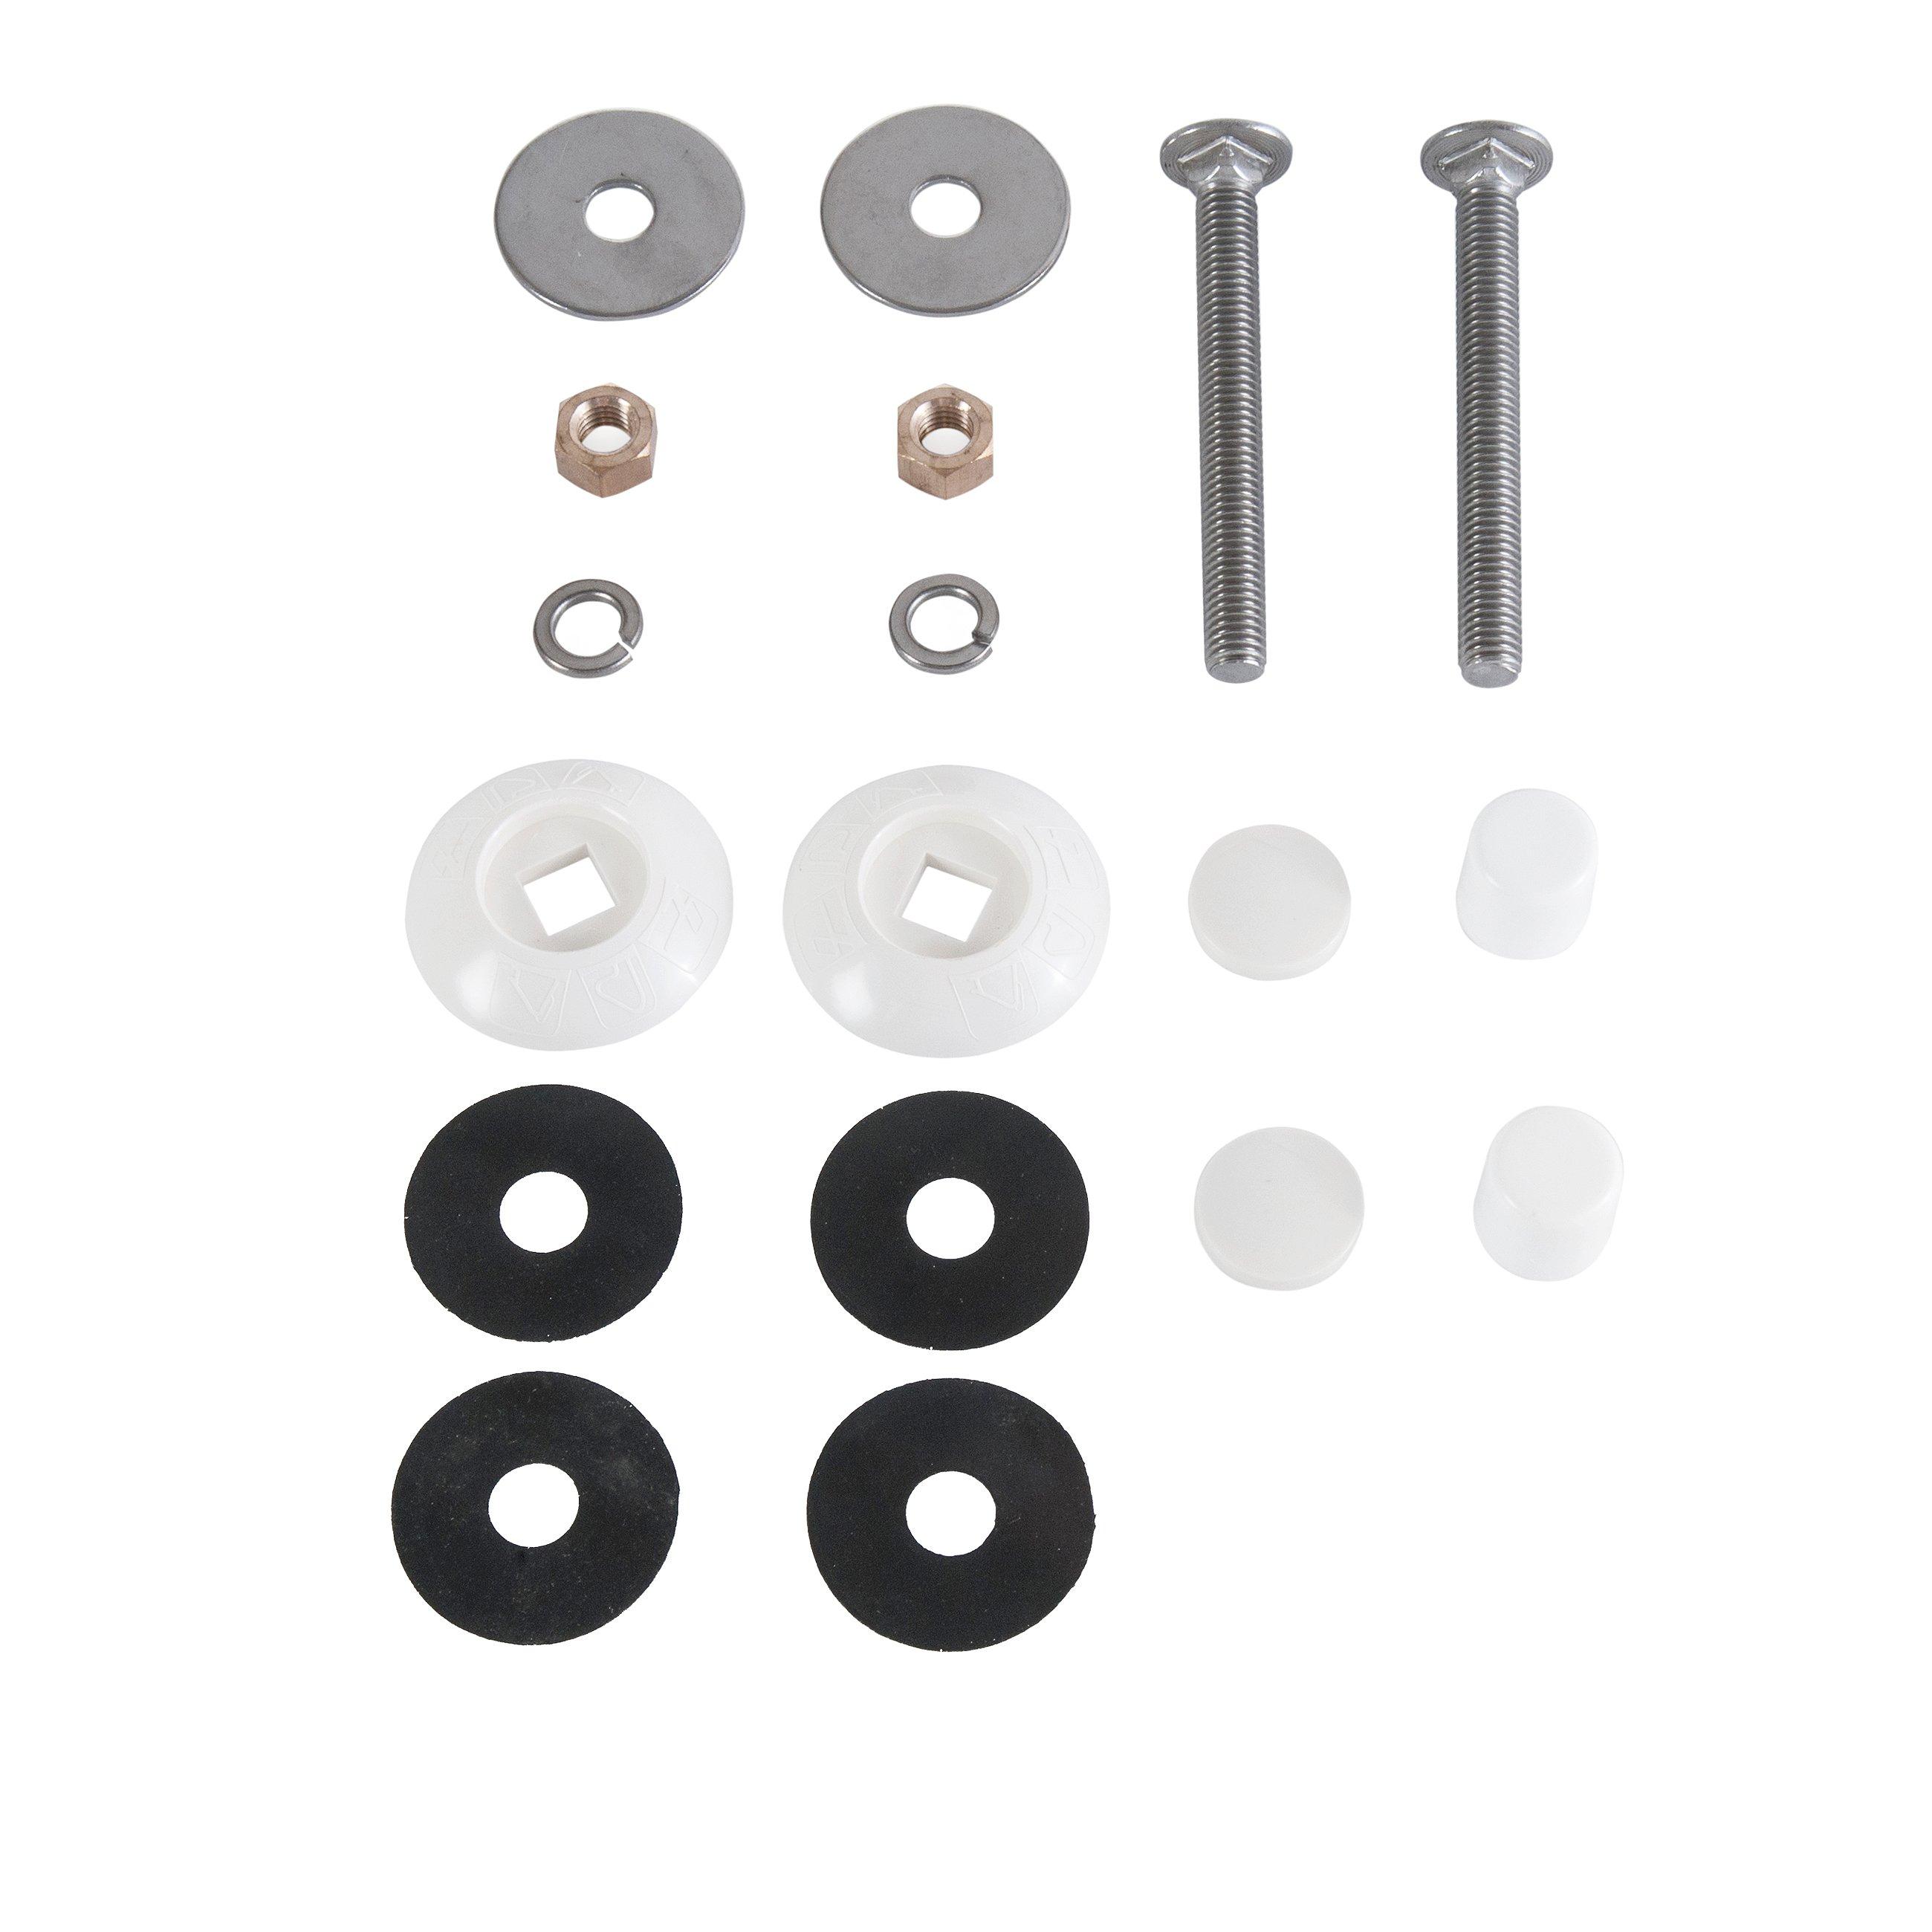 S.R Smith  Resi Bolt Kit 1/2in x 4.5in Stainless Steel